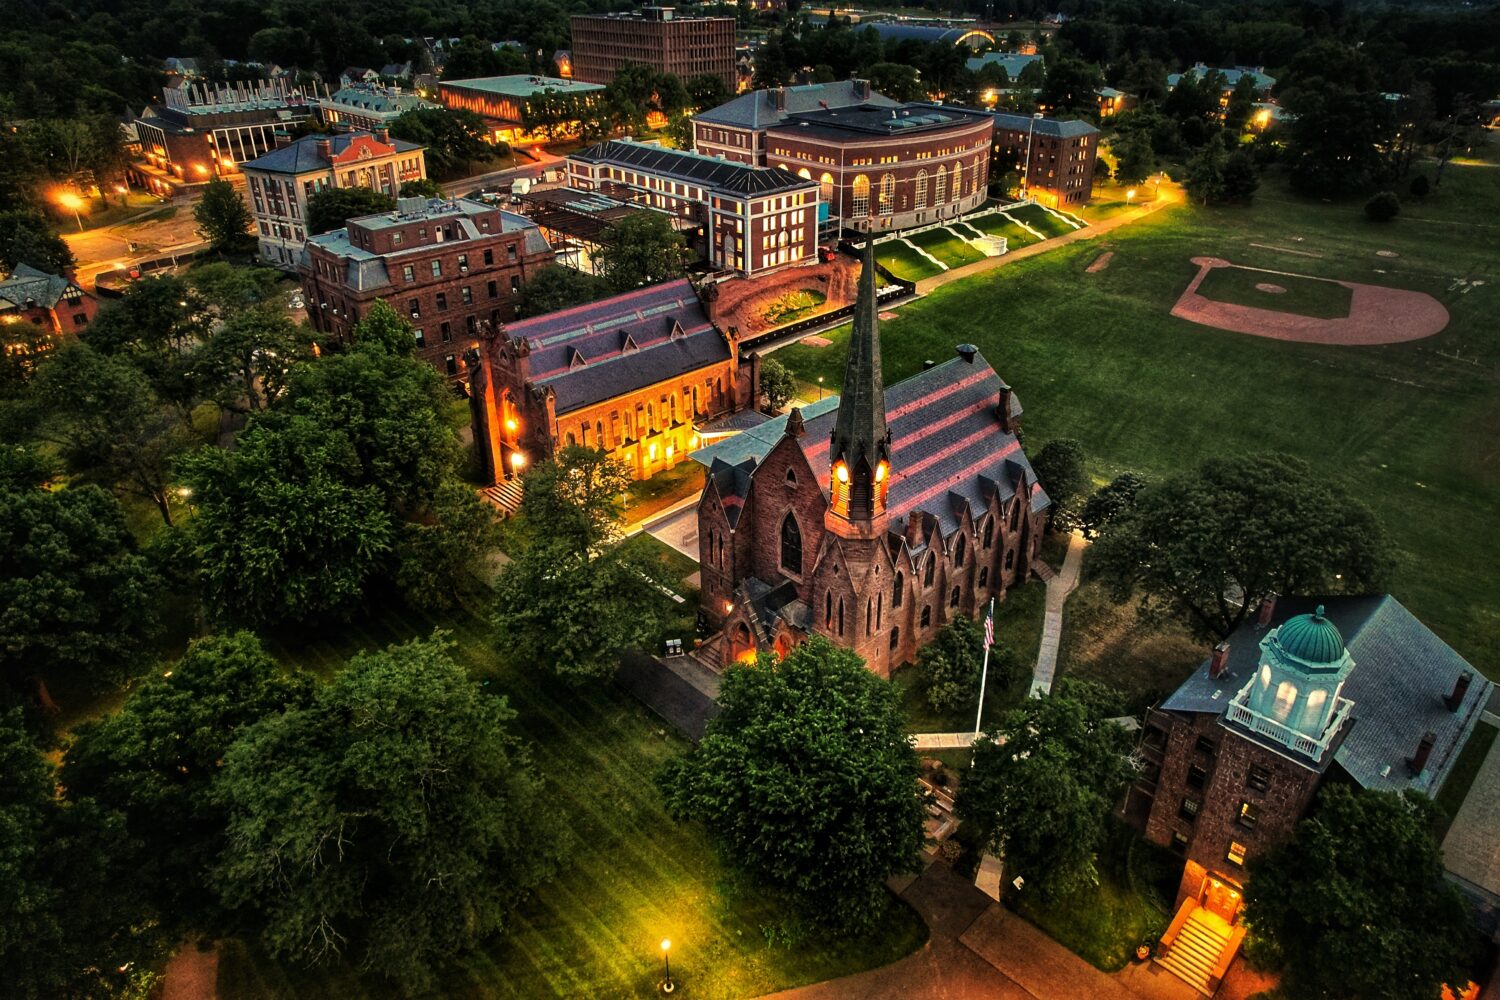 This is a large rectangular image of A serene and solemn Memorial Chapel illuminated by soft lighting at night. The chapel stands tall with its architectural features visible, including arched windows and a prominent spire. The surrounding area appears calm and peaceful, creating a reflective atmosphere